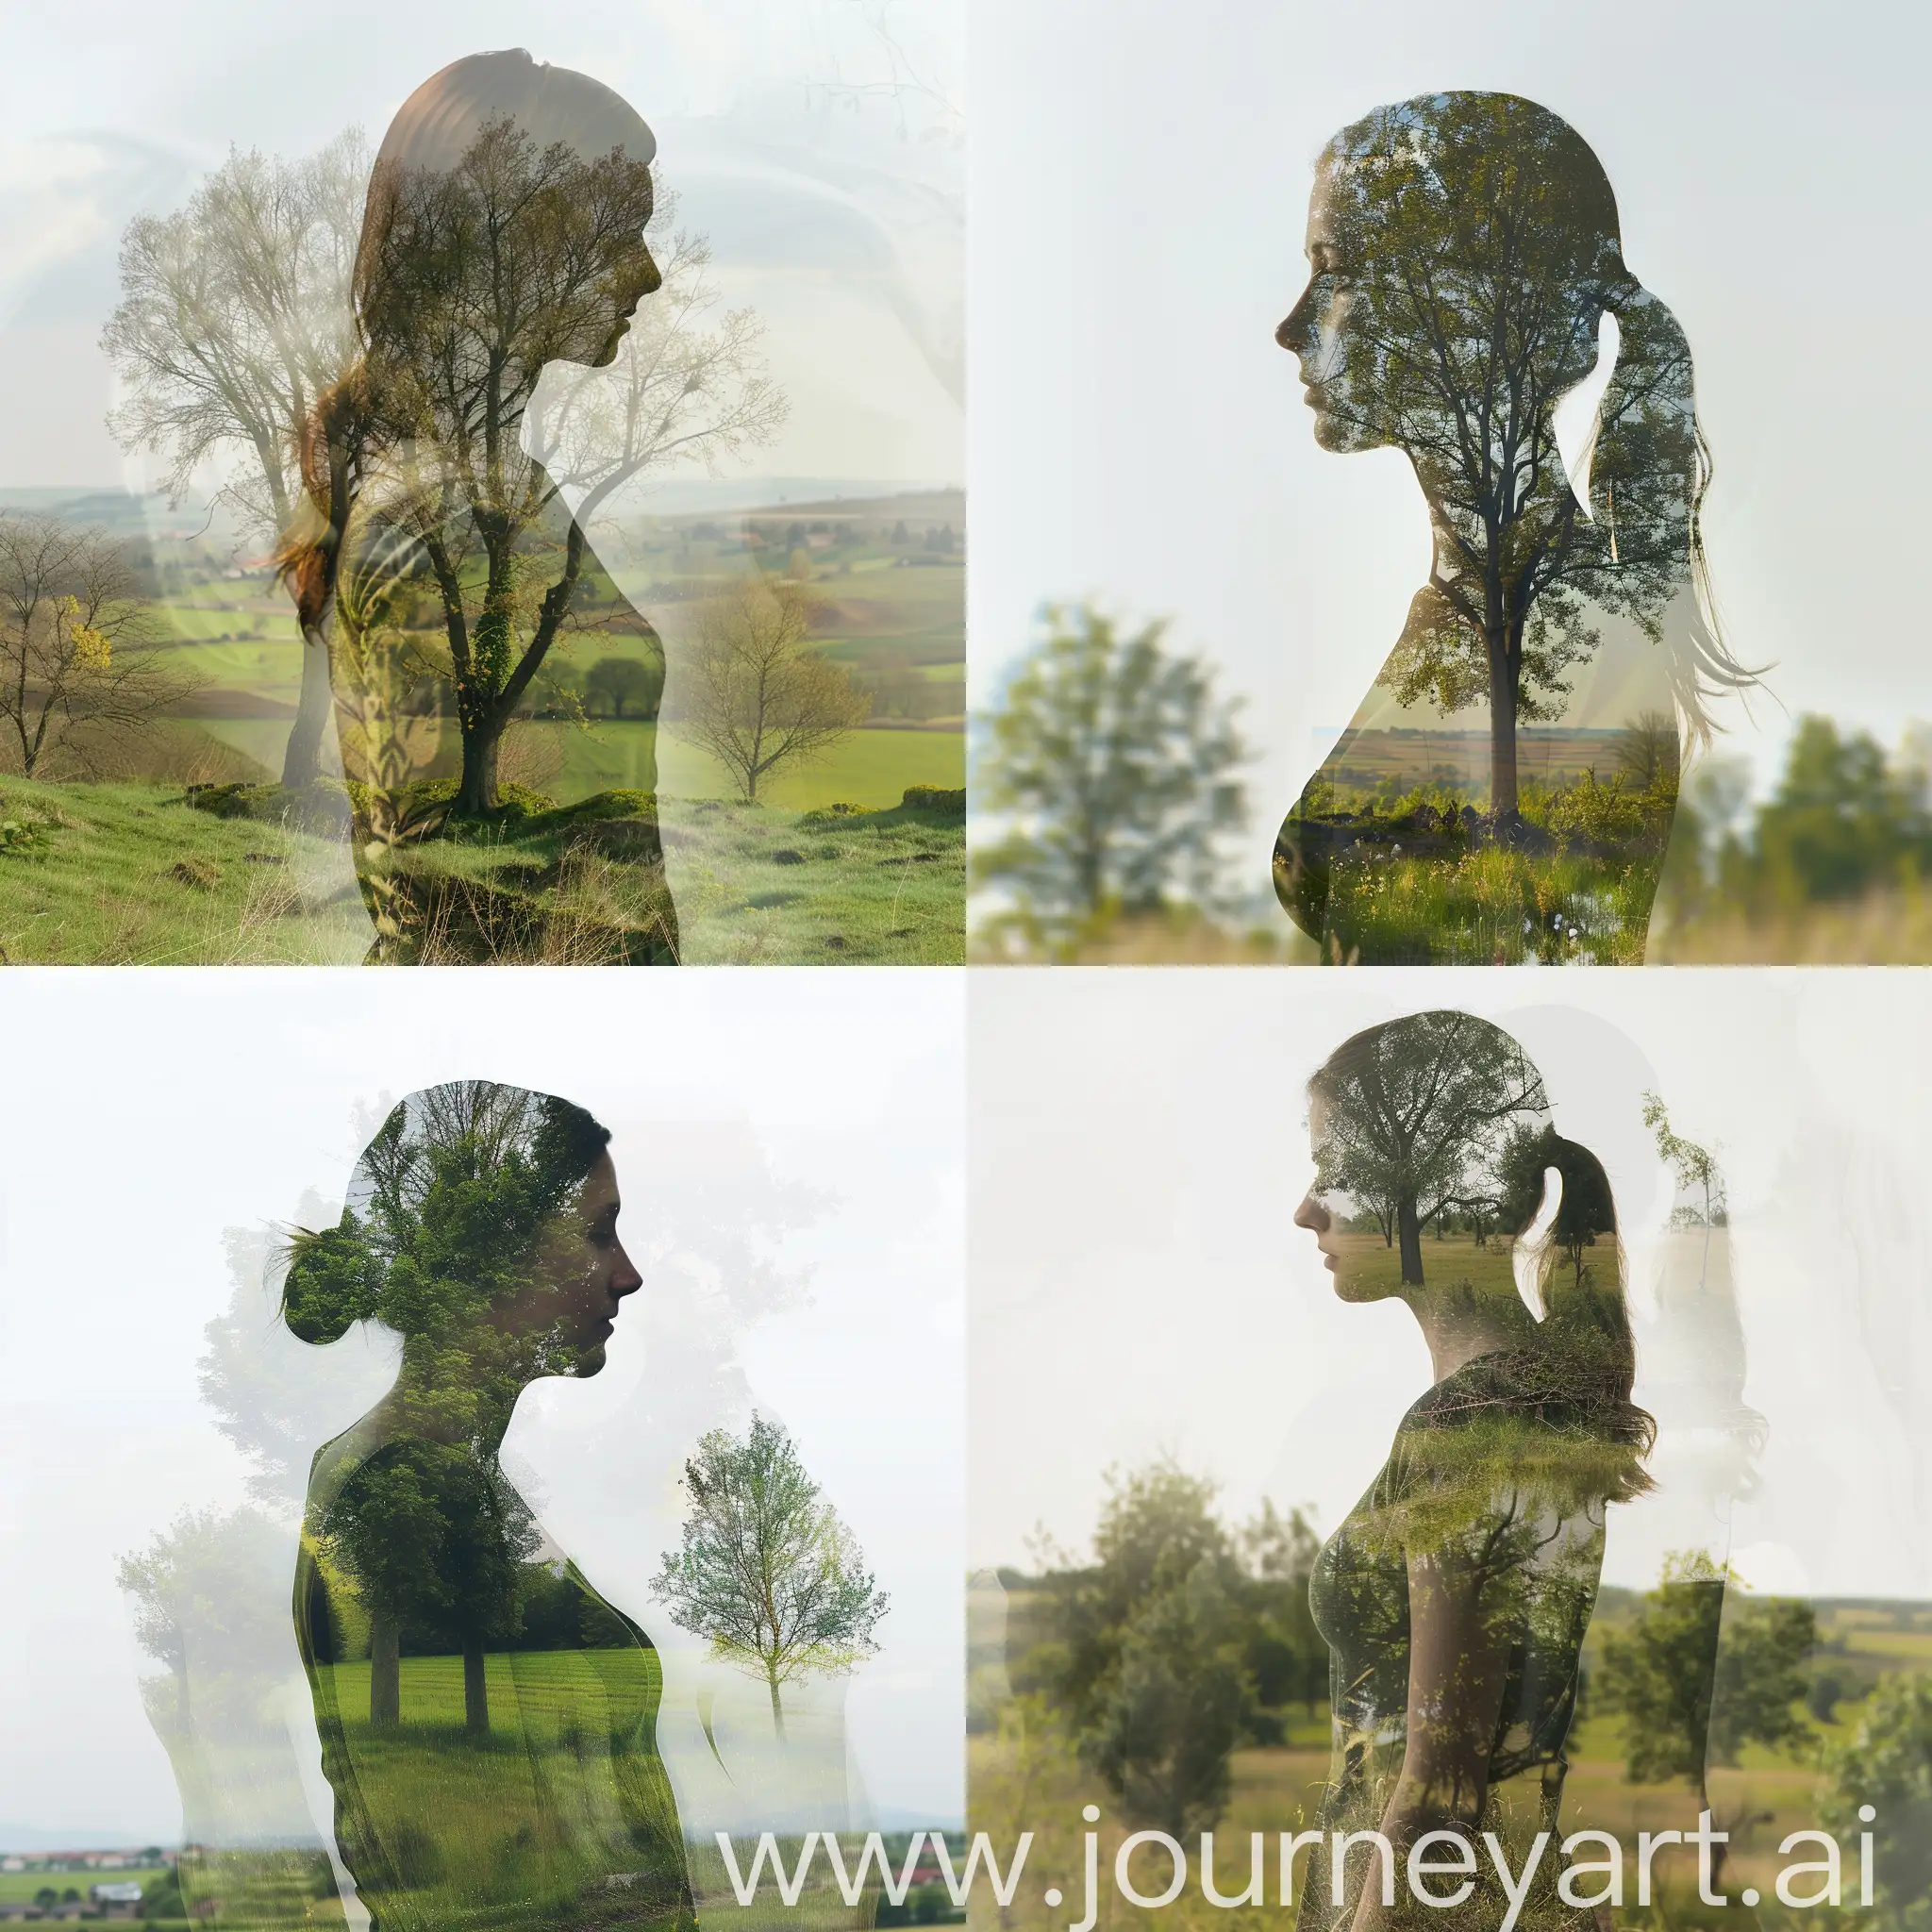 The transparent woman's body shows a natural atmosphere, with trees and green fields.